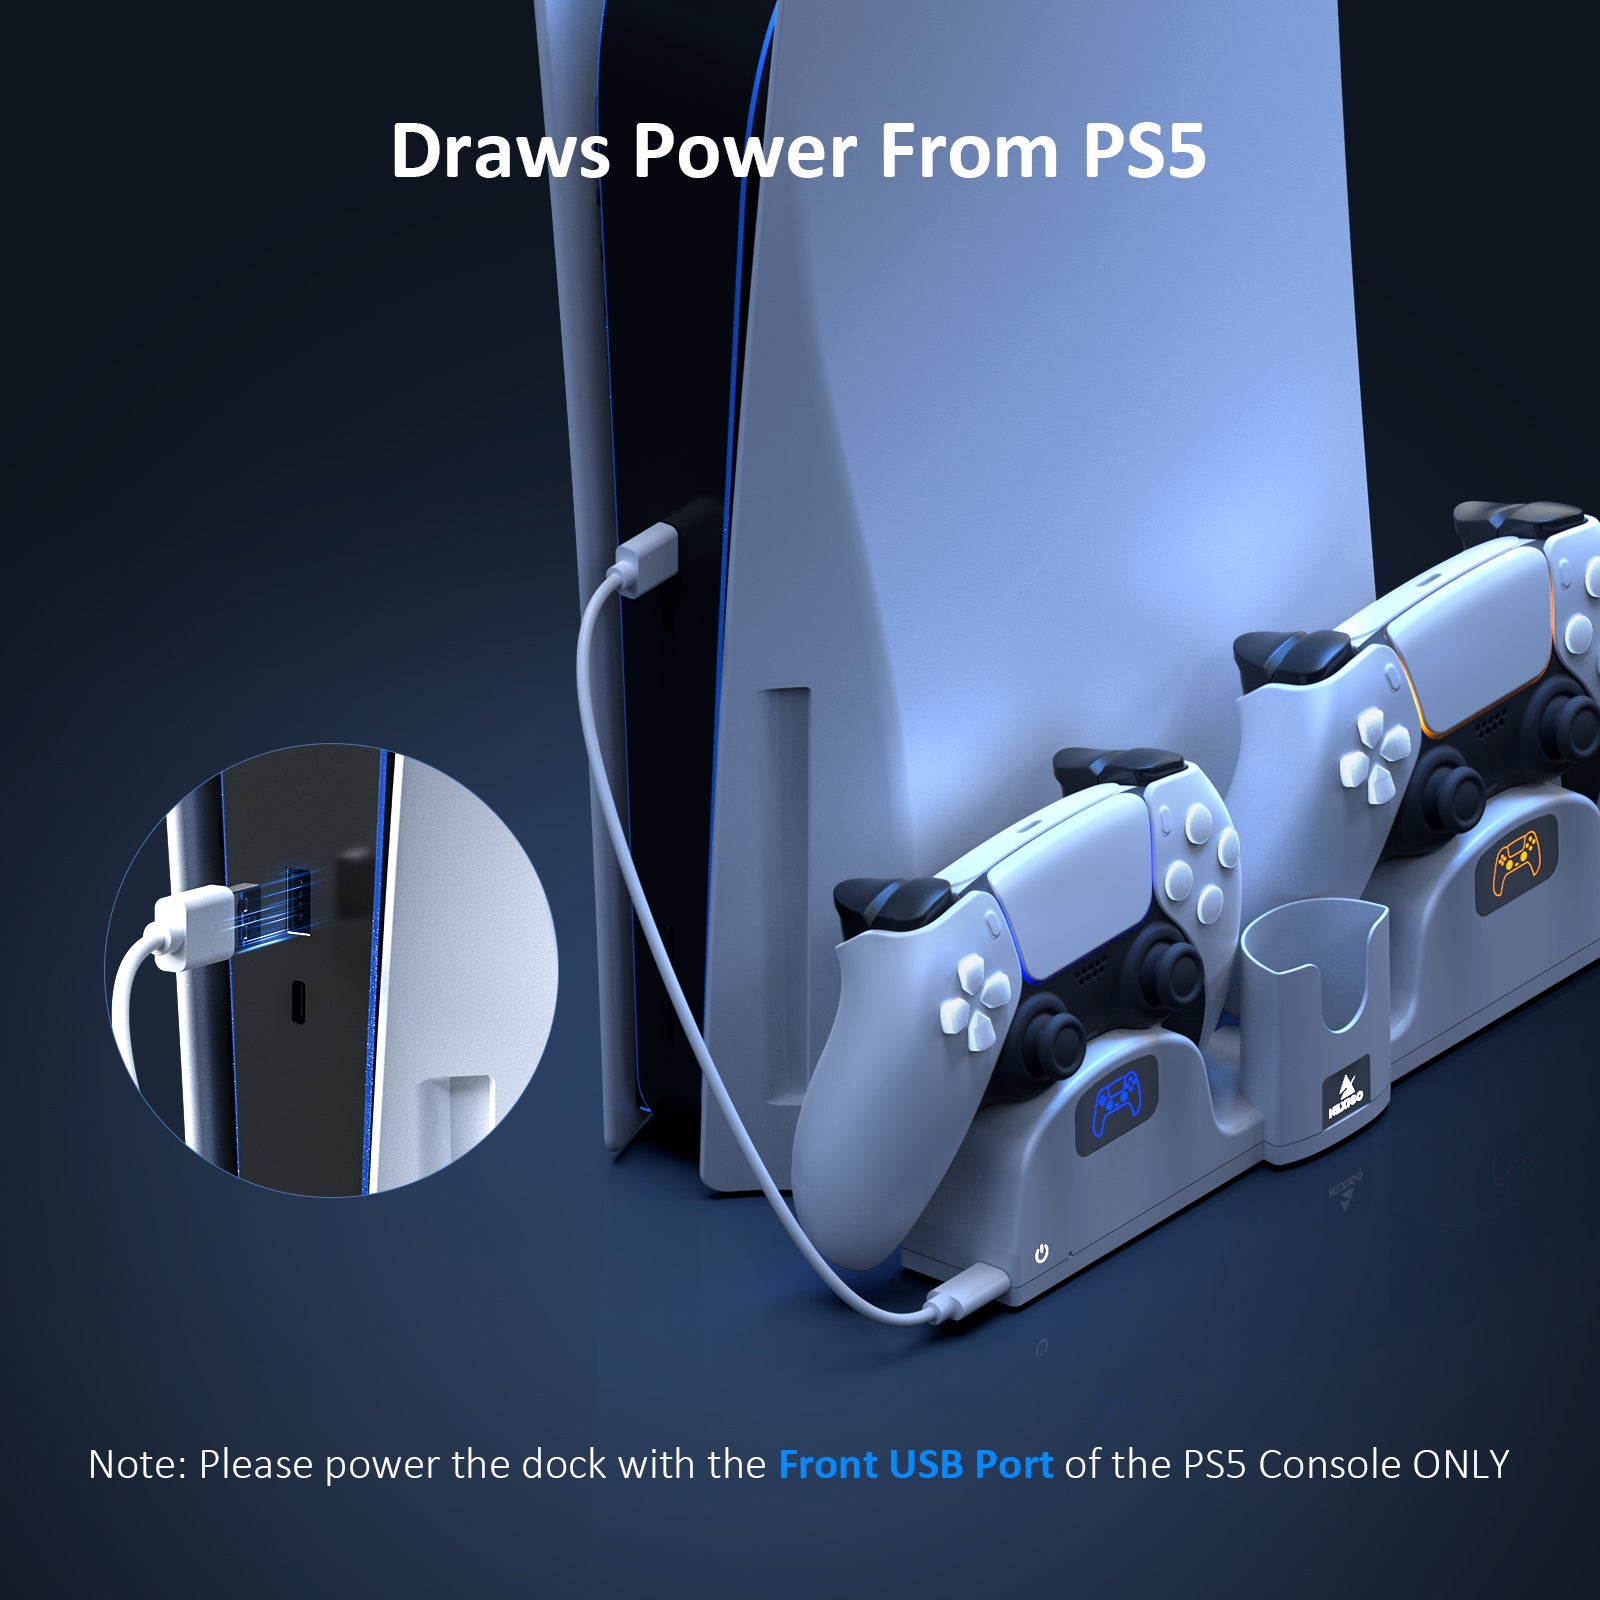 Power up your controllers effortlessly by connecting the dock to the front USB port of your PS5 console.